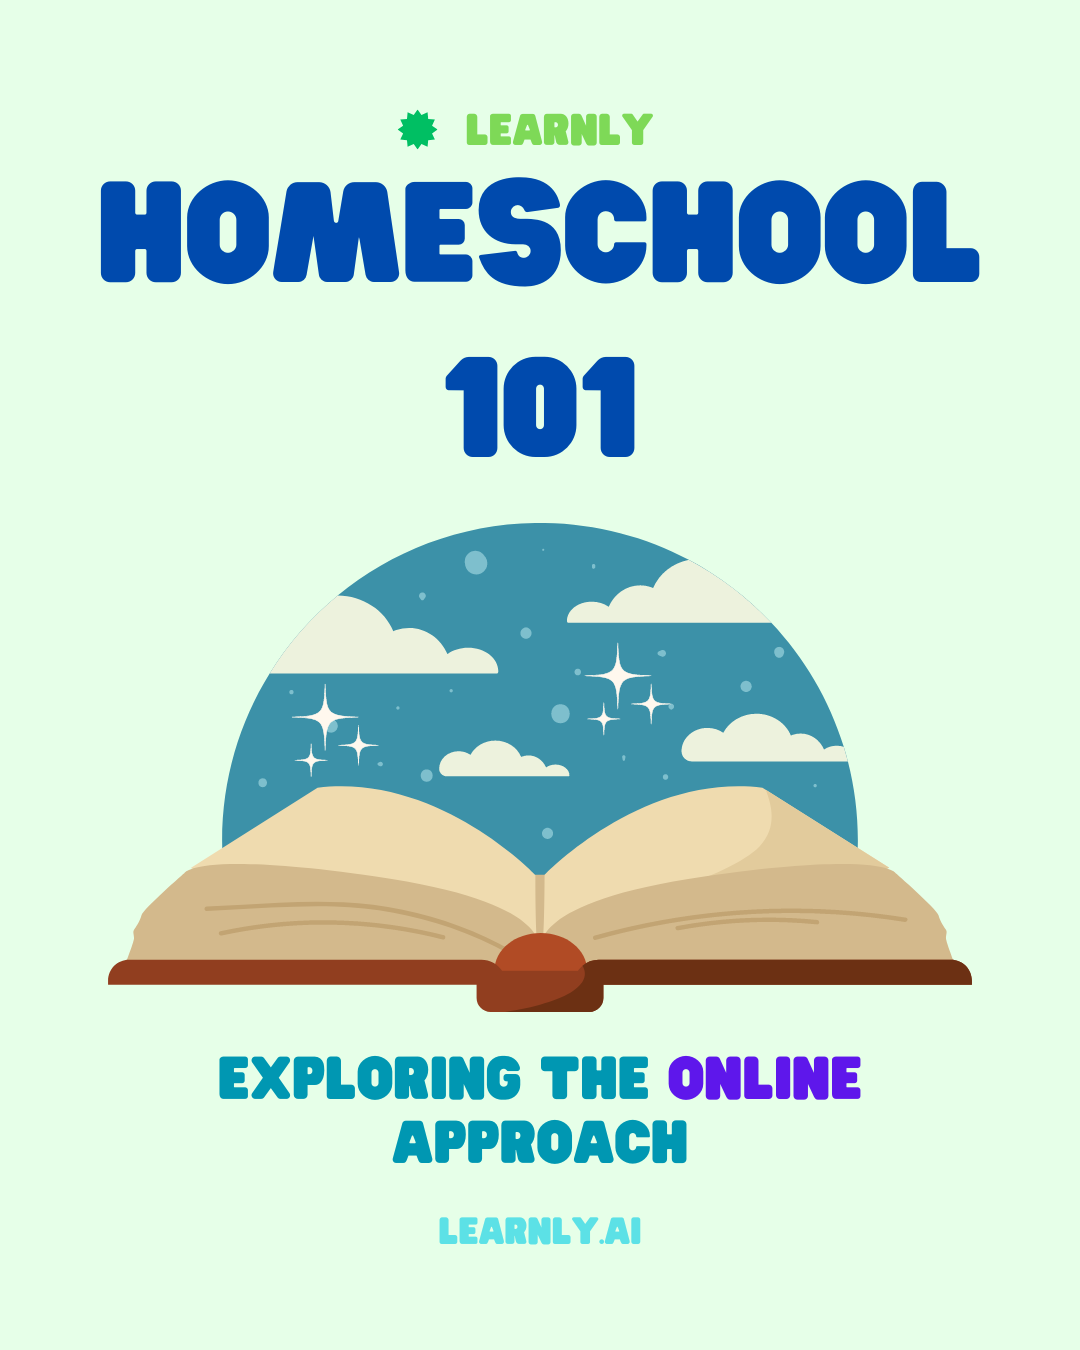 Homeschooling Approaches 101: Exploring the Online Approach to Homeschooling